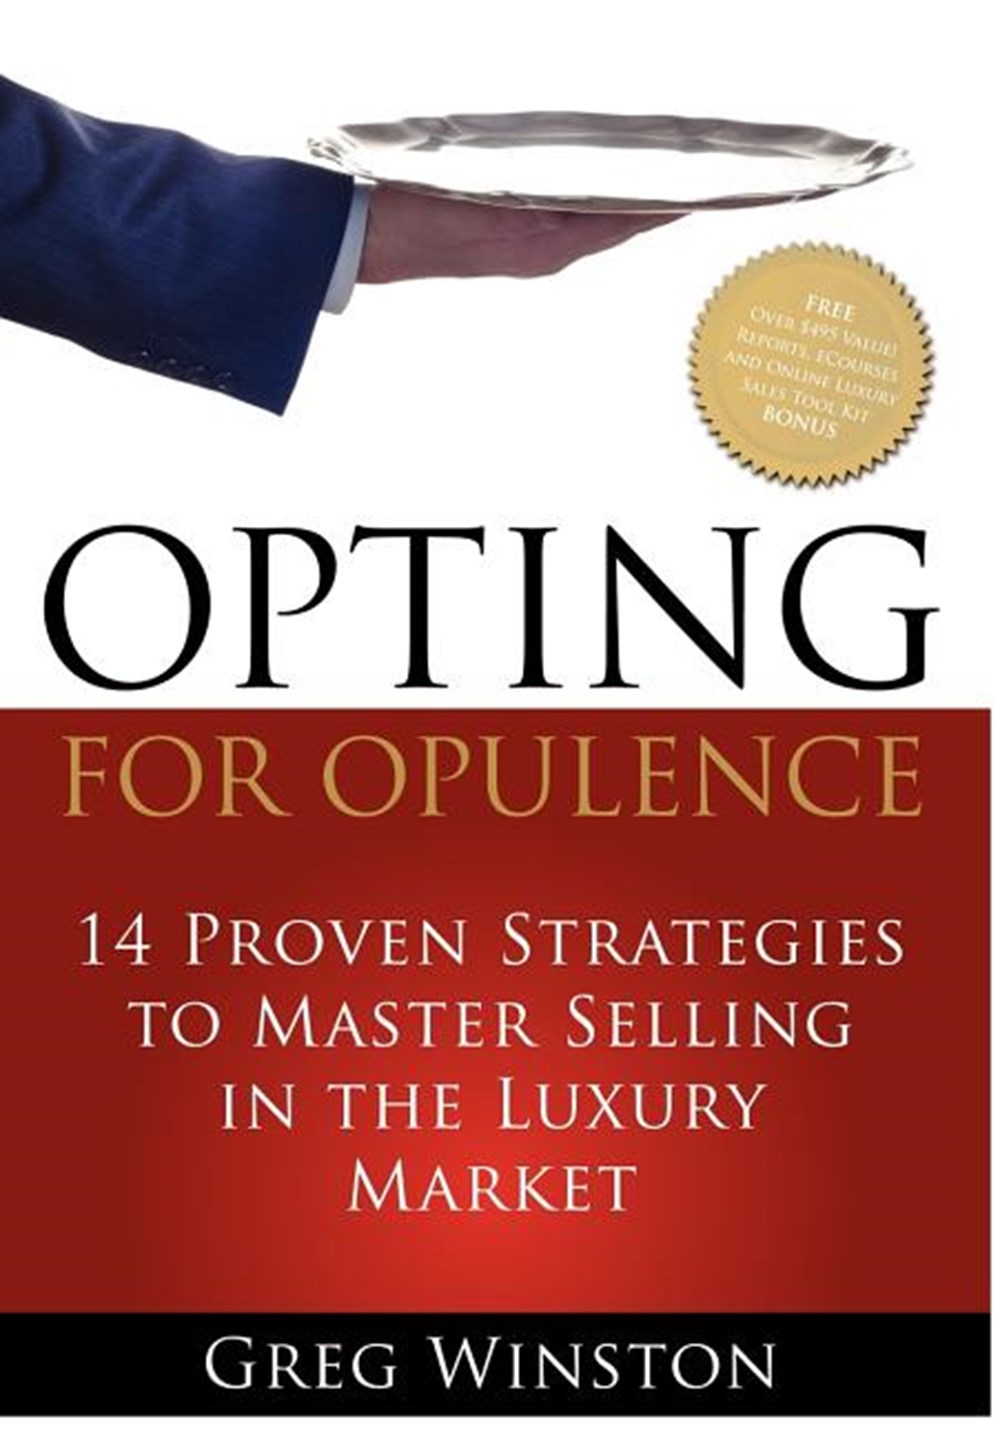 Opting for Opulence: 14 Proven Strategies to Master Selling in the Luxury Market